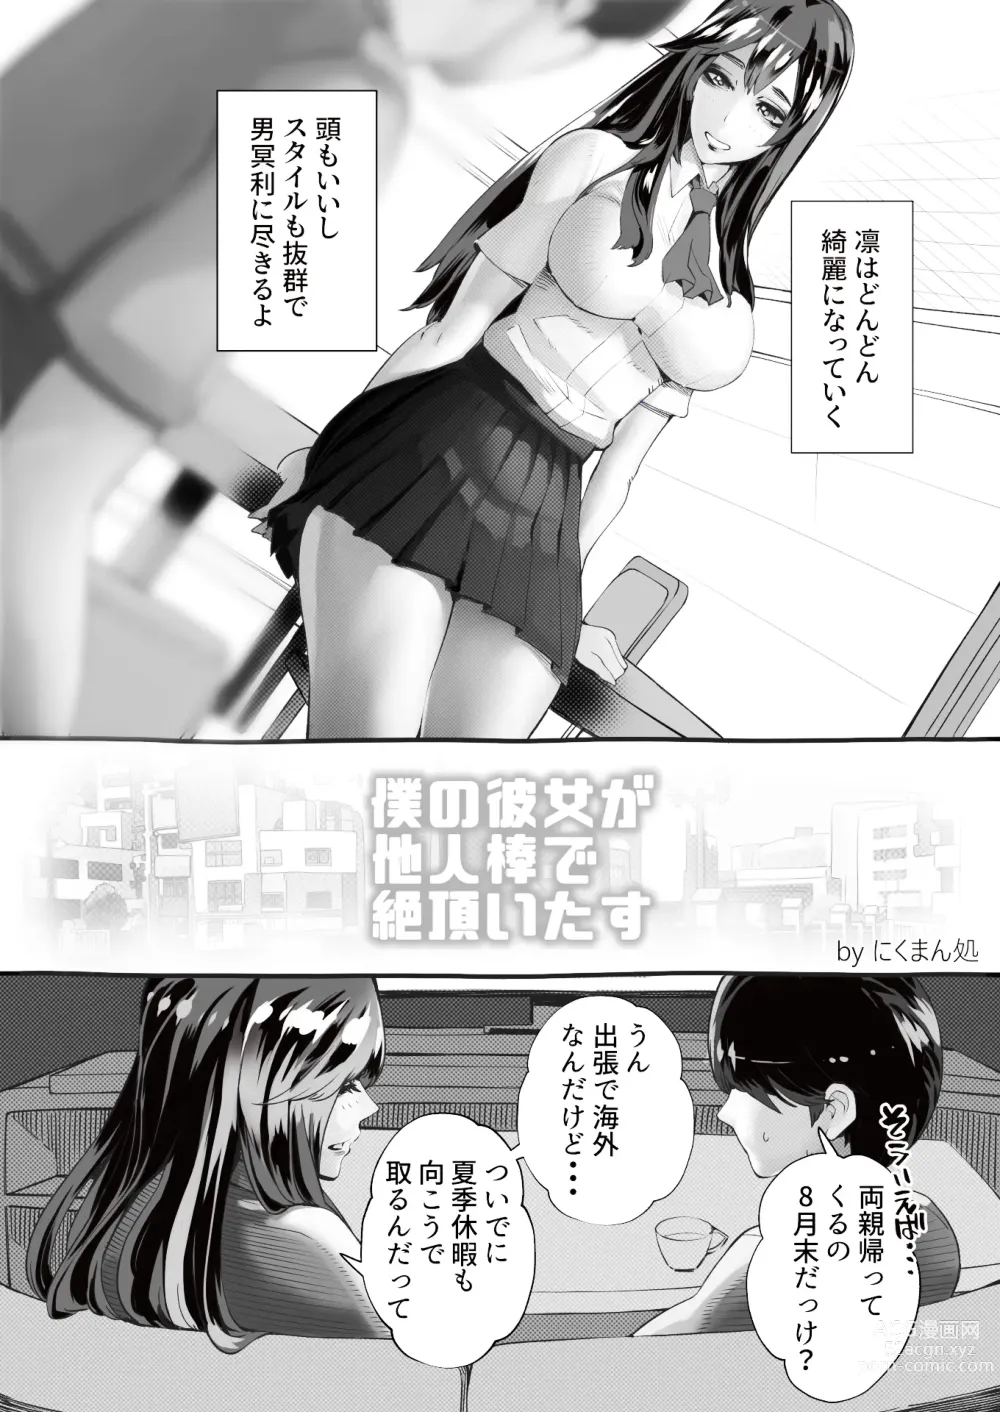 Page 6 of doujinshi 僕の彼女が他人棒で絶頂いたす